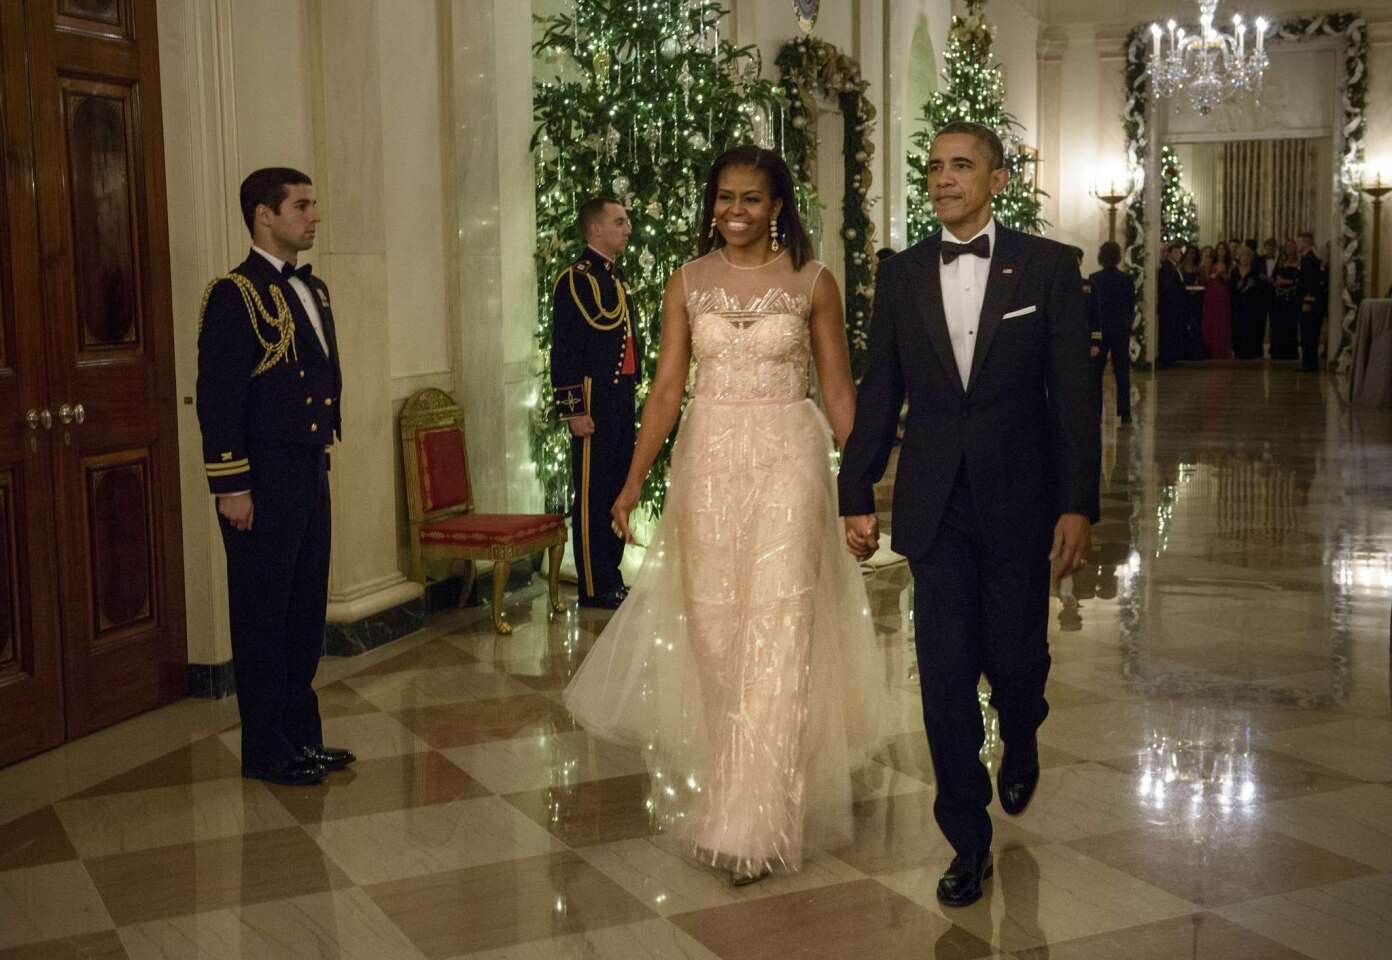 First Lady Michelle Obama and President Obama arrive for the 37th Kennedy Center Honors in the East Room of the White House in Washington, DC.